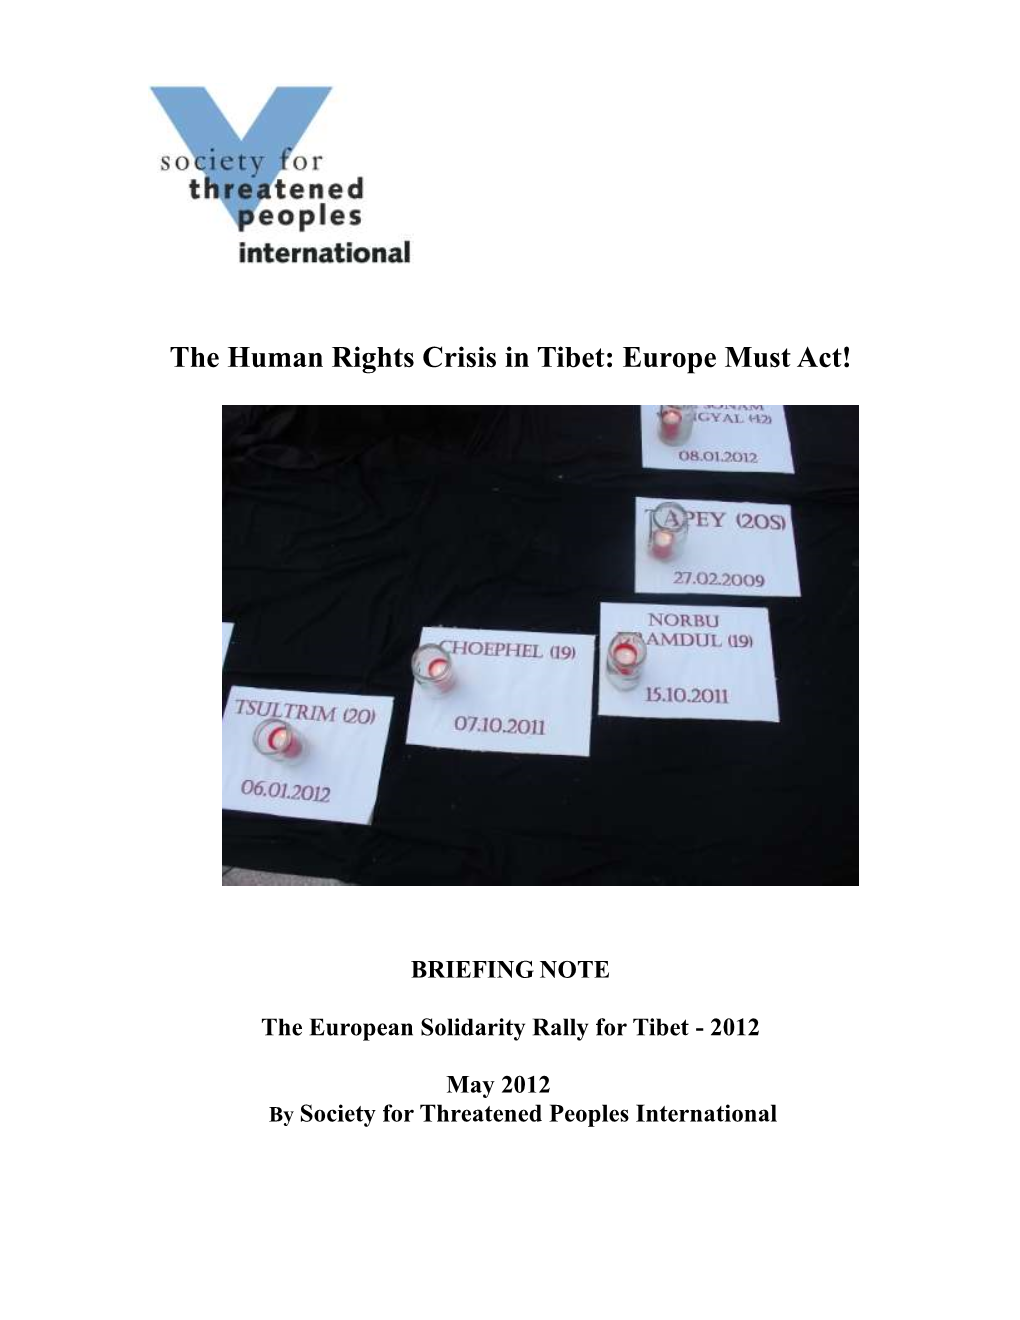 The Human Rights Crisis Tibet: Europe Must